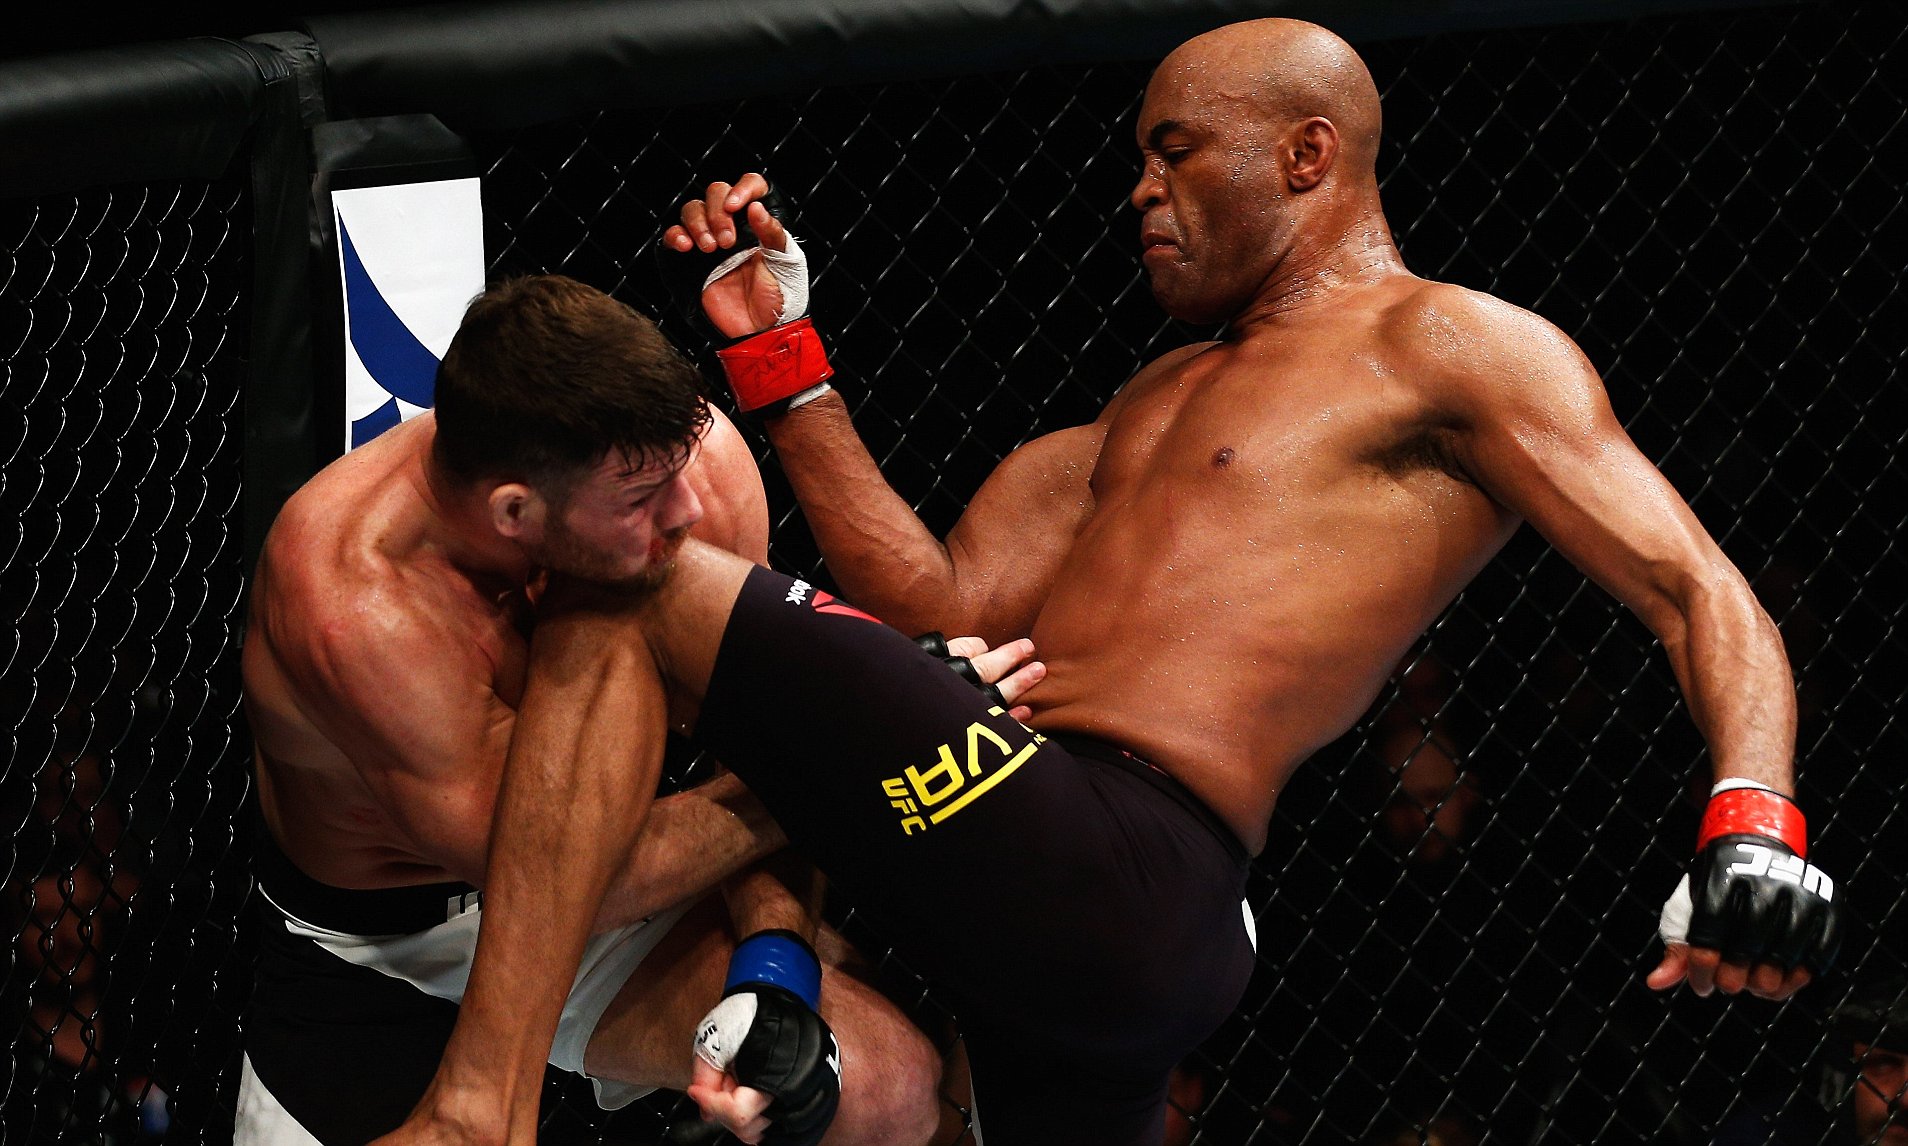 video review : Anderson Silva versus Michael Bisping at UFC Fight Night